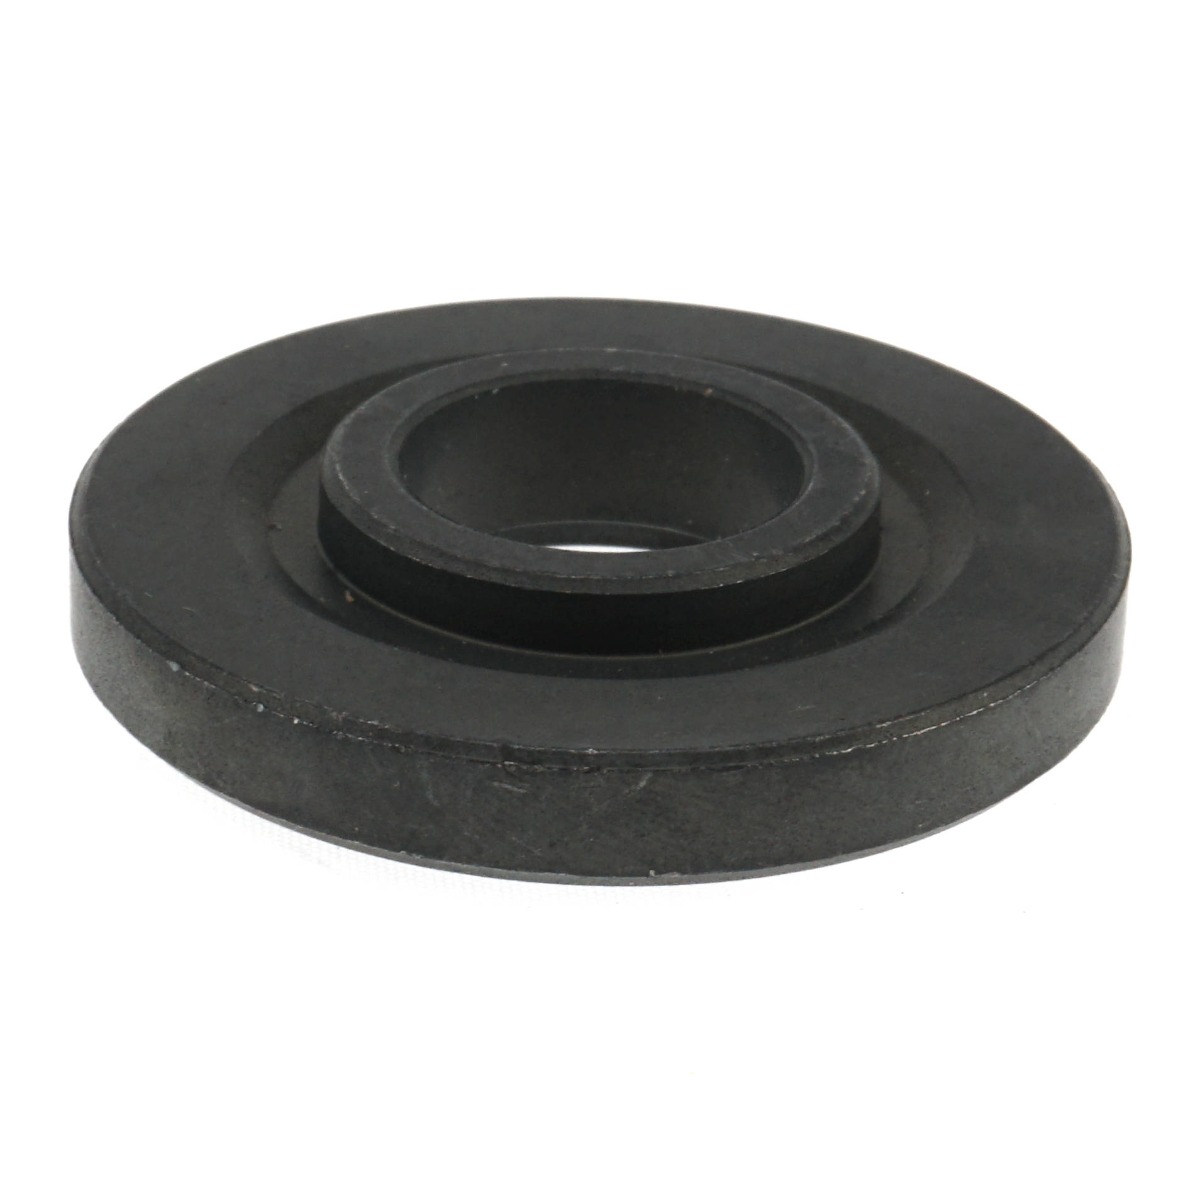 Metabo 341031290 Inner Clamping Flange for Angle Grinders